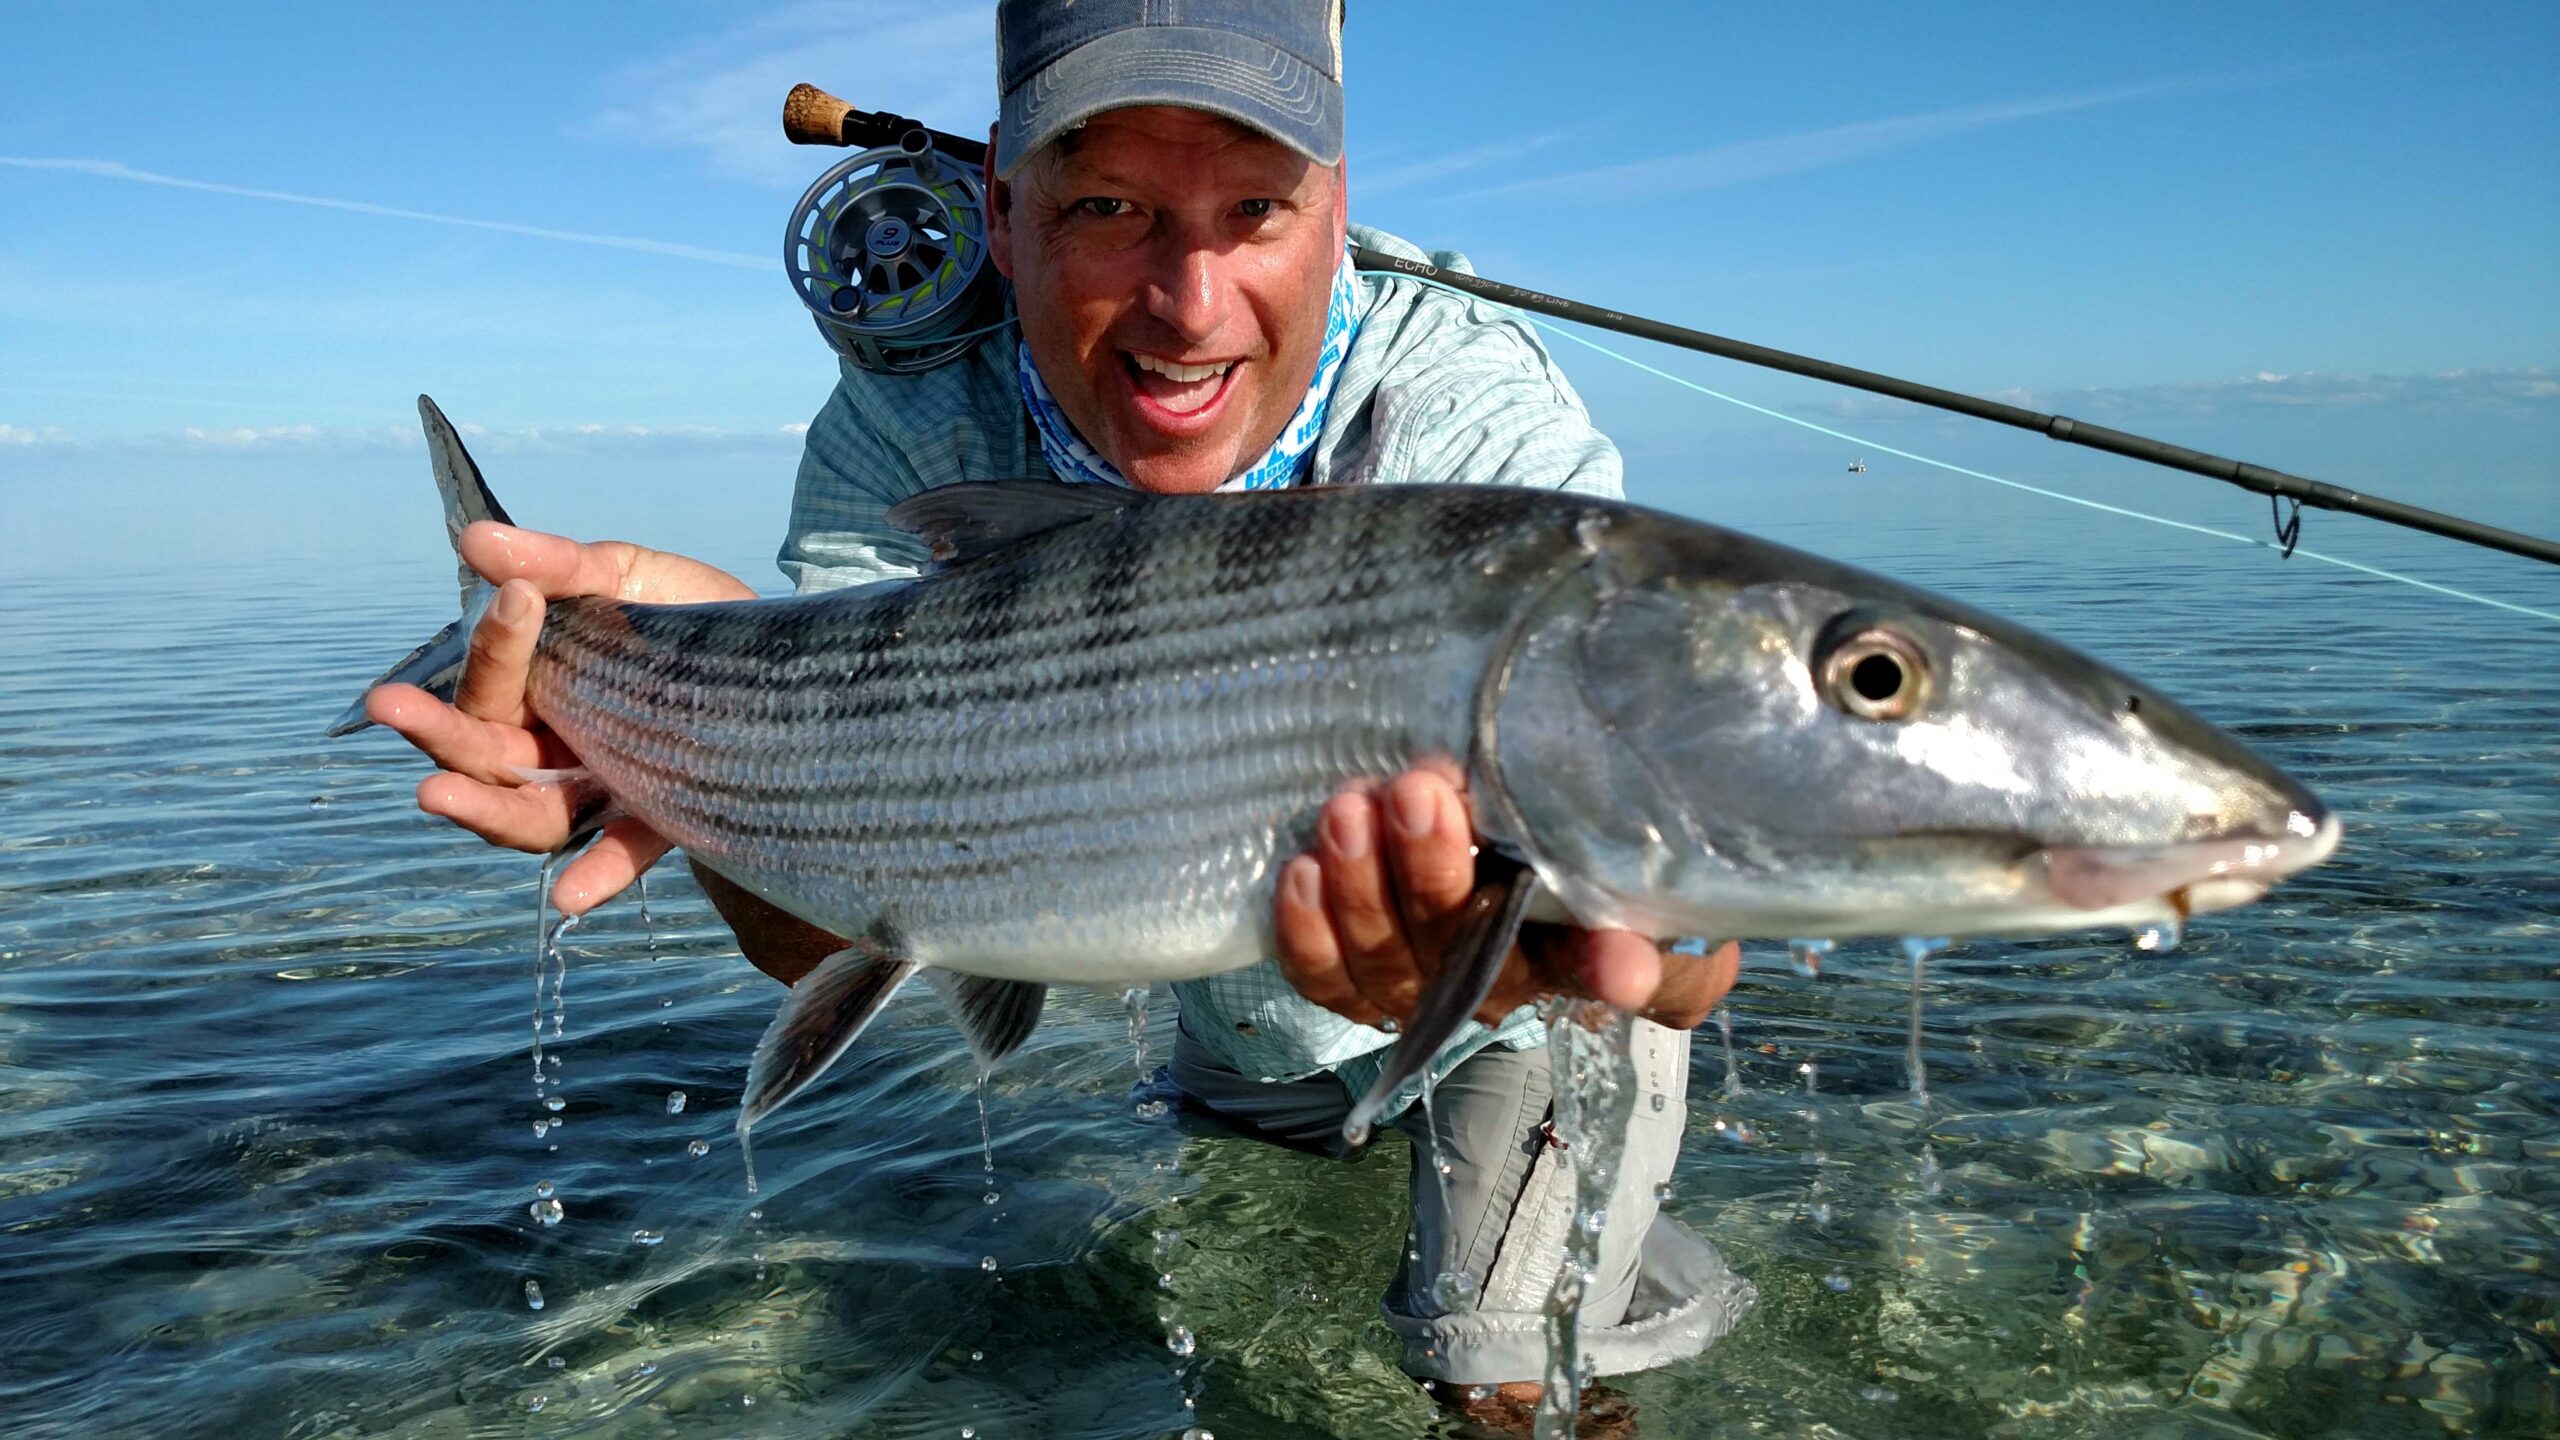 Circle hooks required when fishing for striped bass in the ocean starting  Jan. 1 - OBX Today